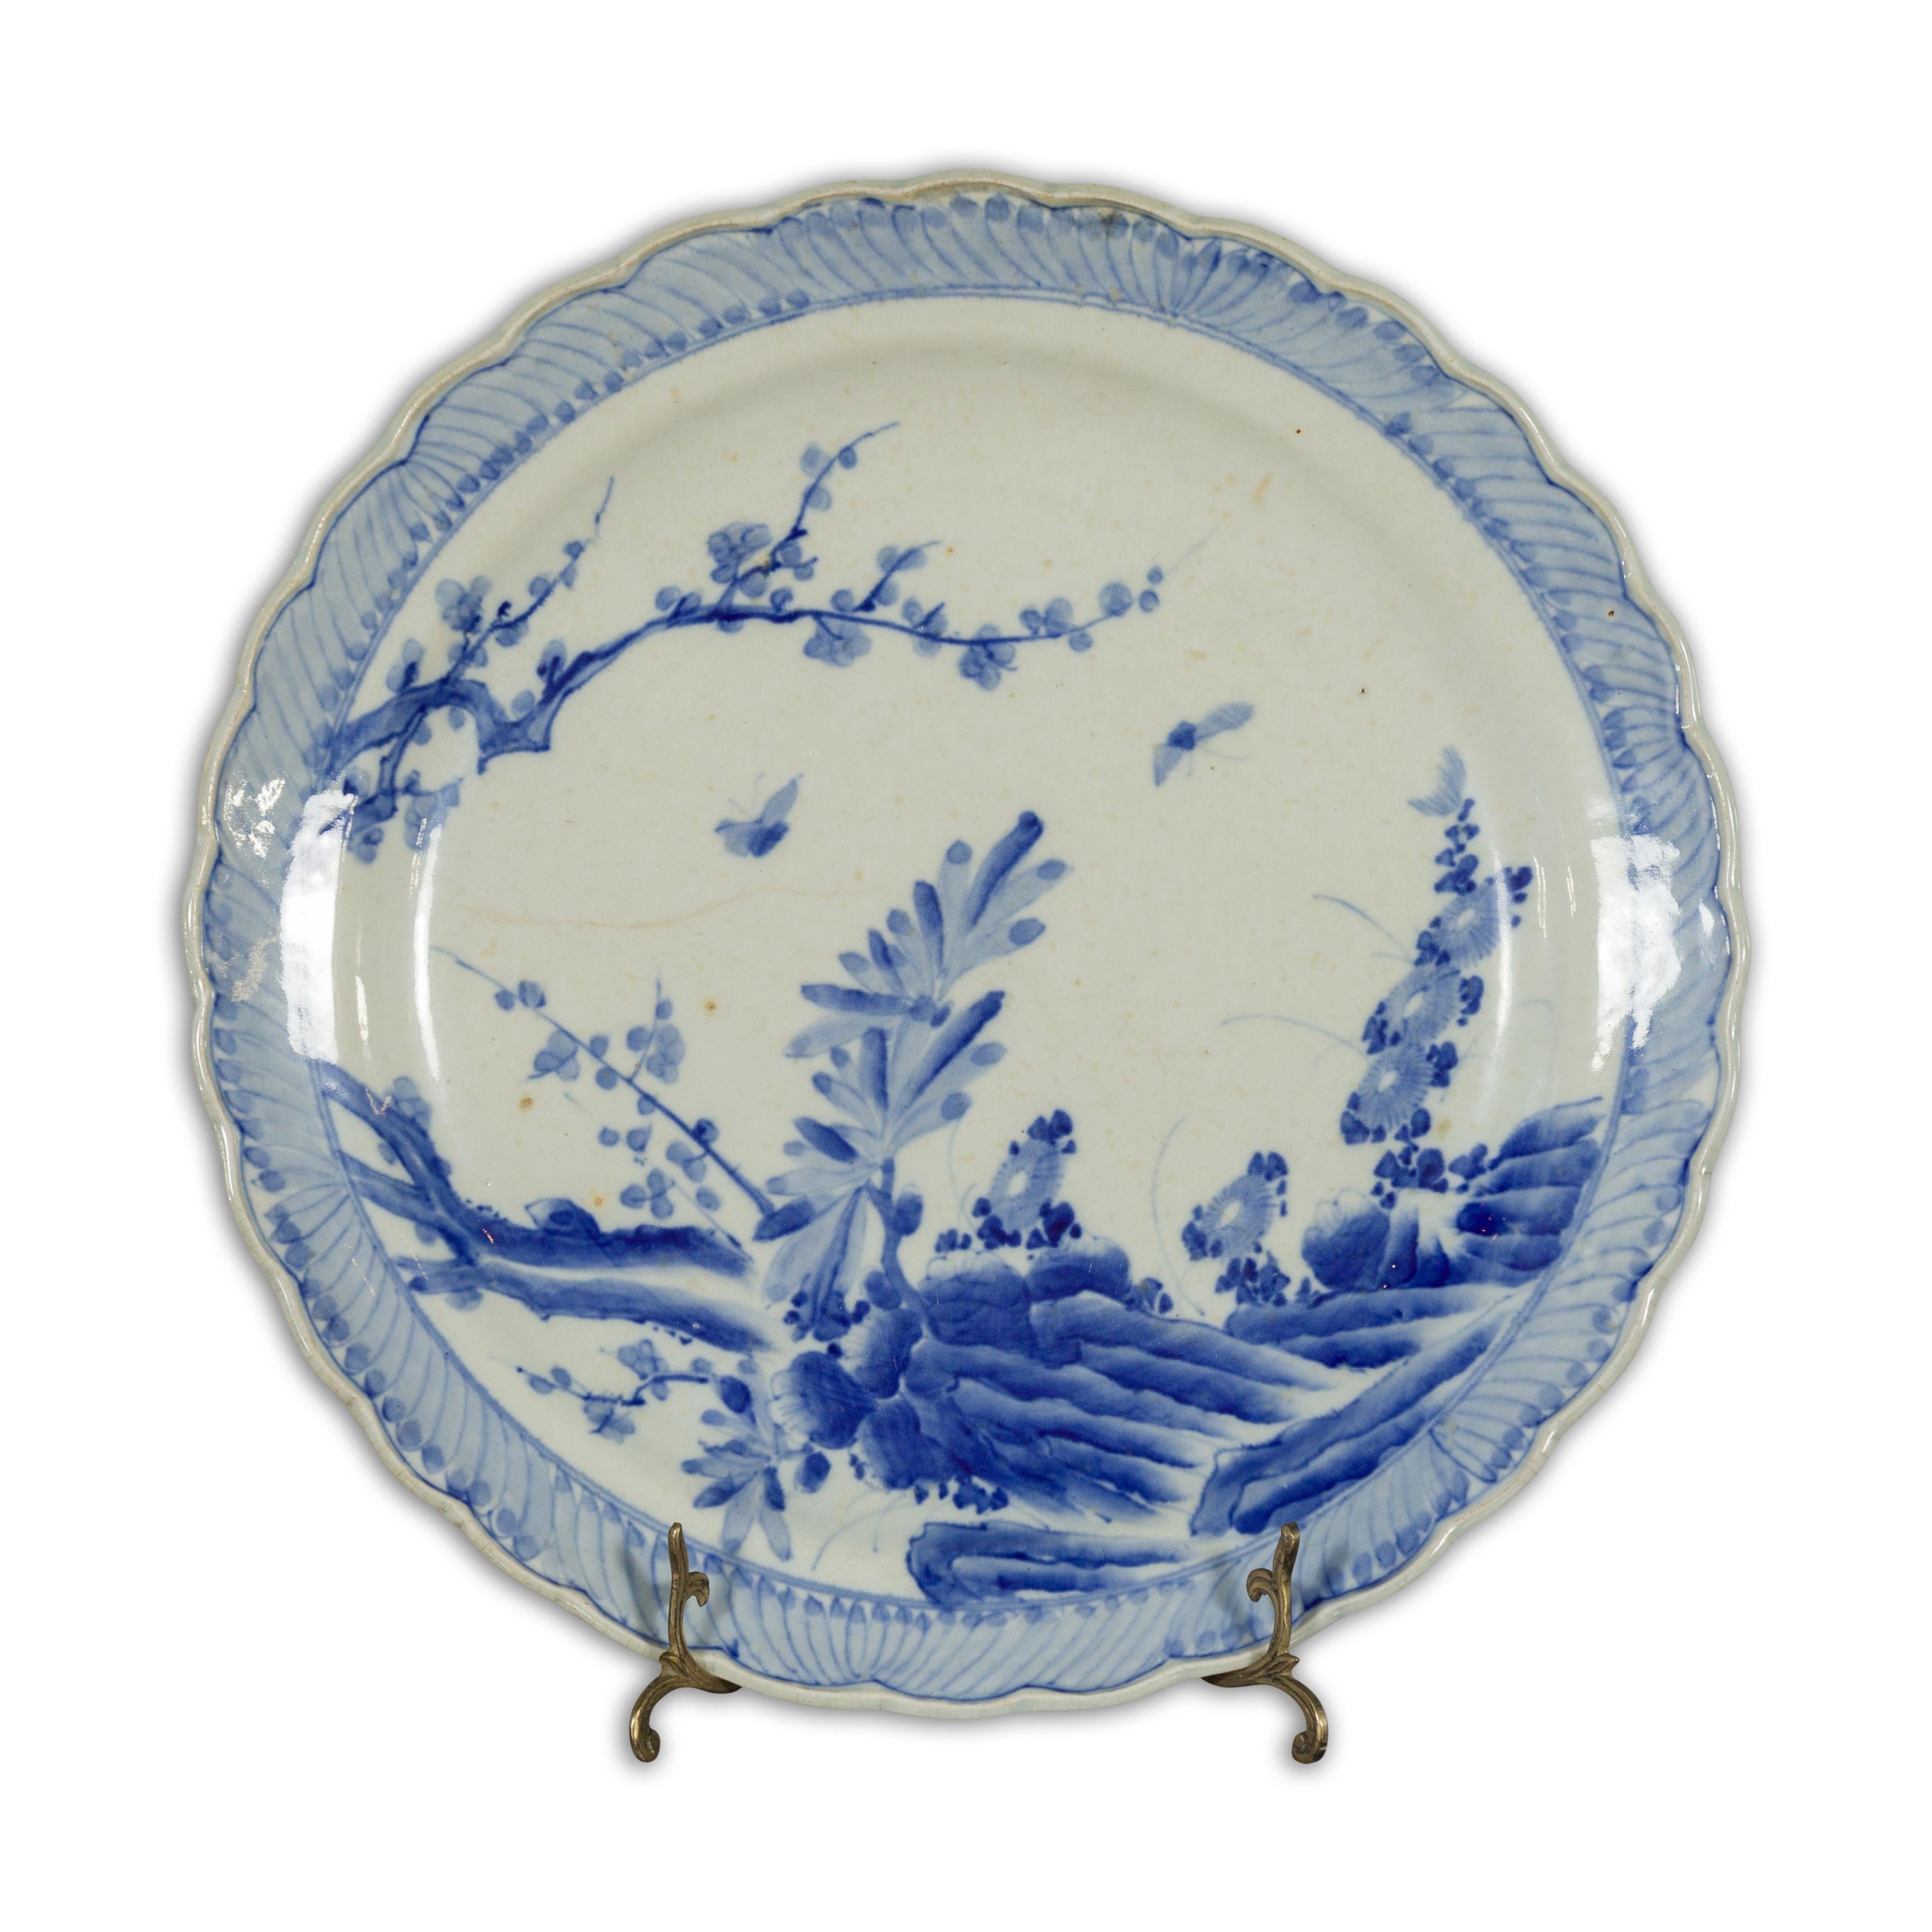 Japanese Blue and White Hand-Painted Porcelain Charger Plate with Foliage Décor For Sale 9